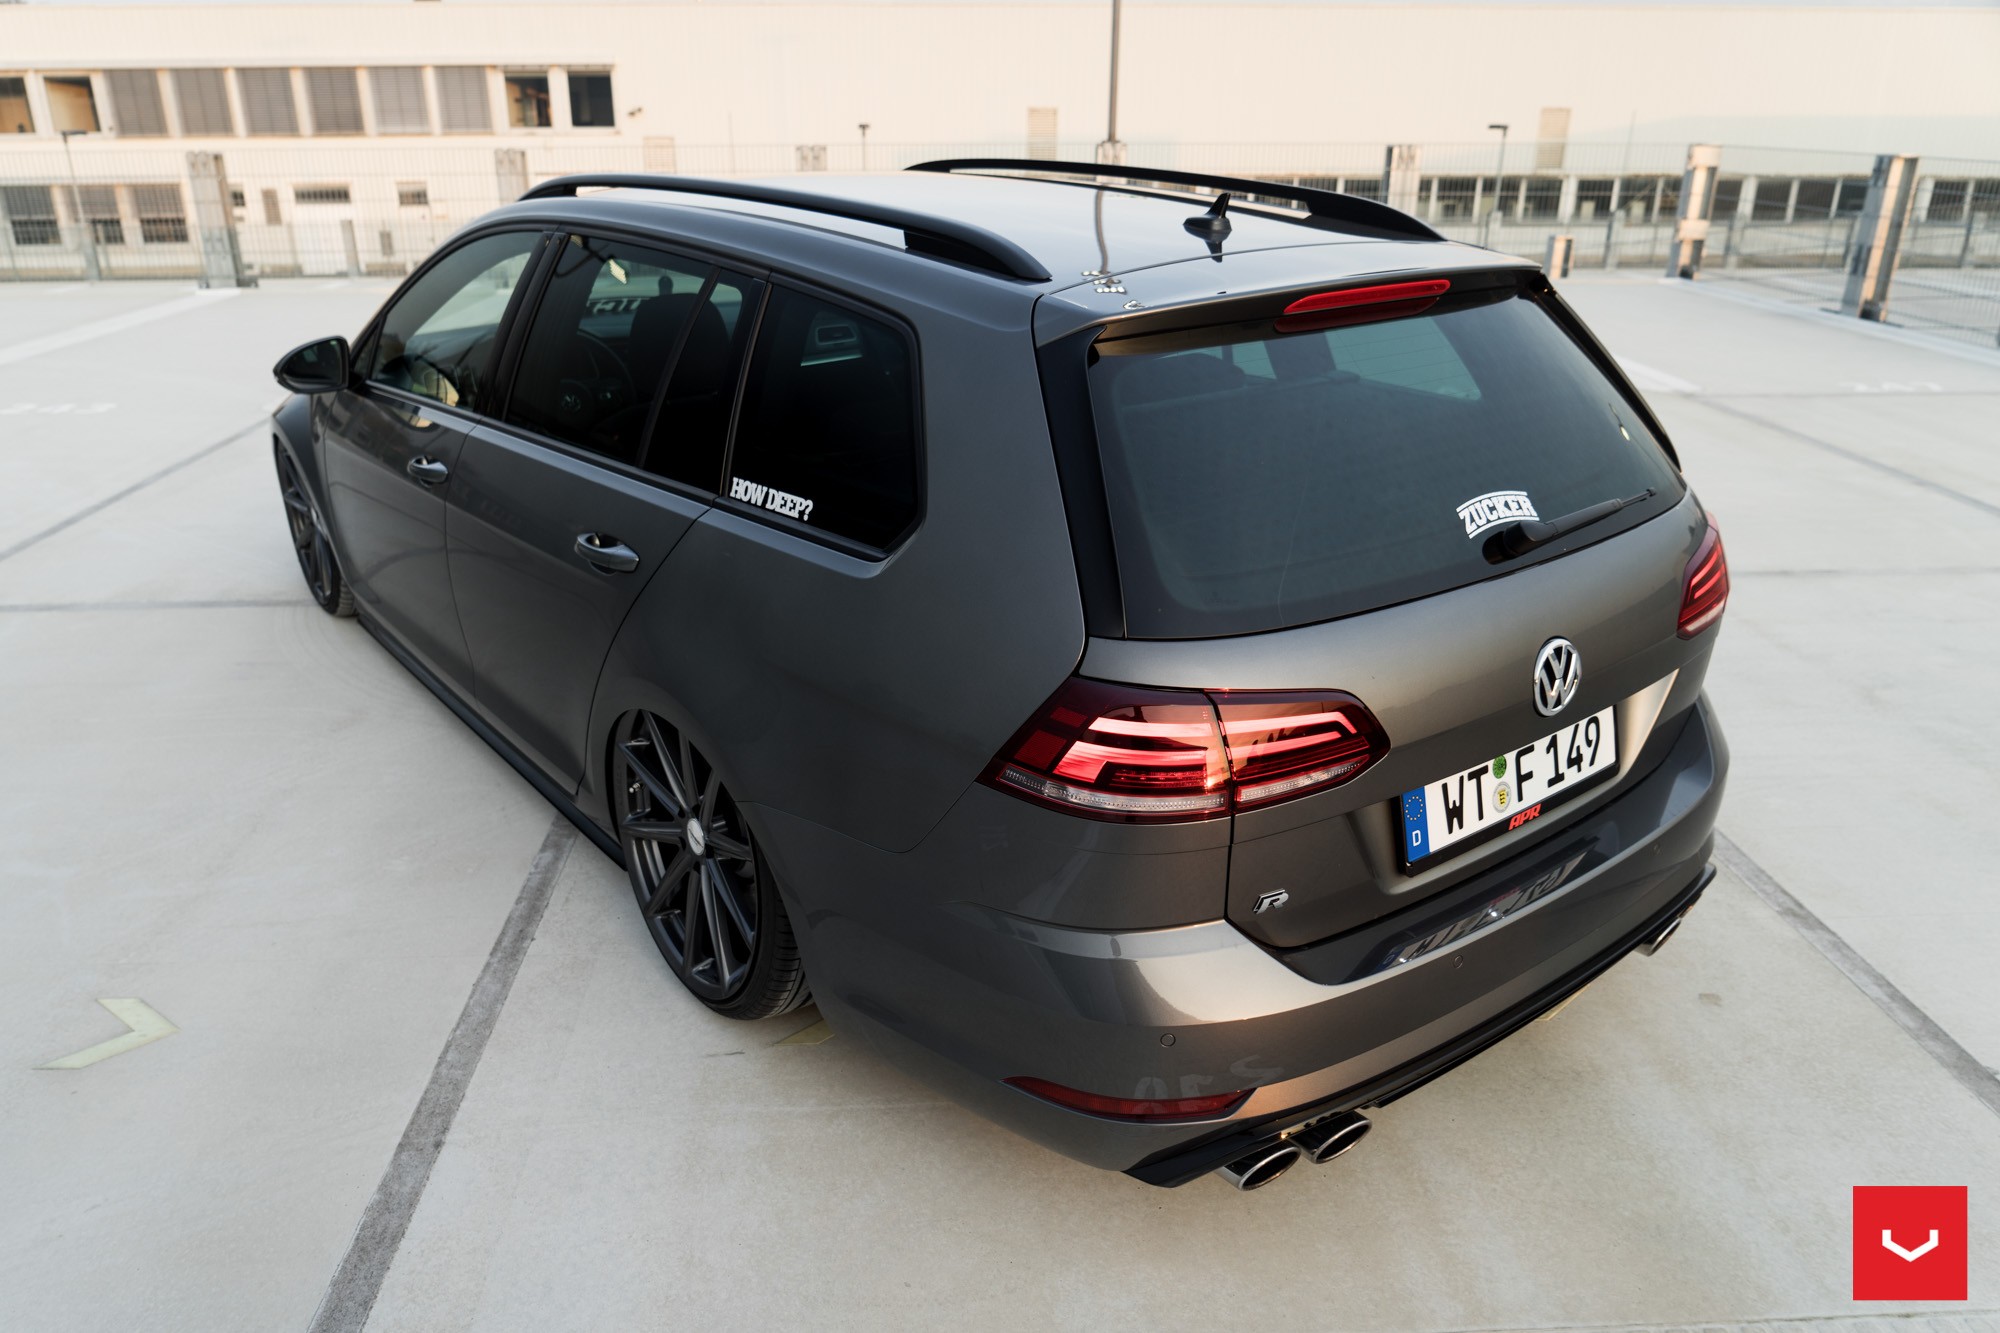 2017 Golf R Variant Gets Stanced on Vossen Wheels for Tuning Debut ...